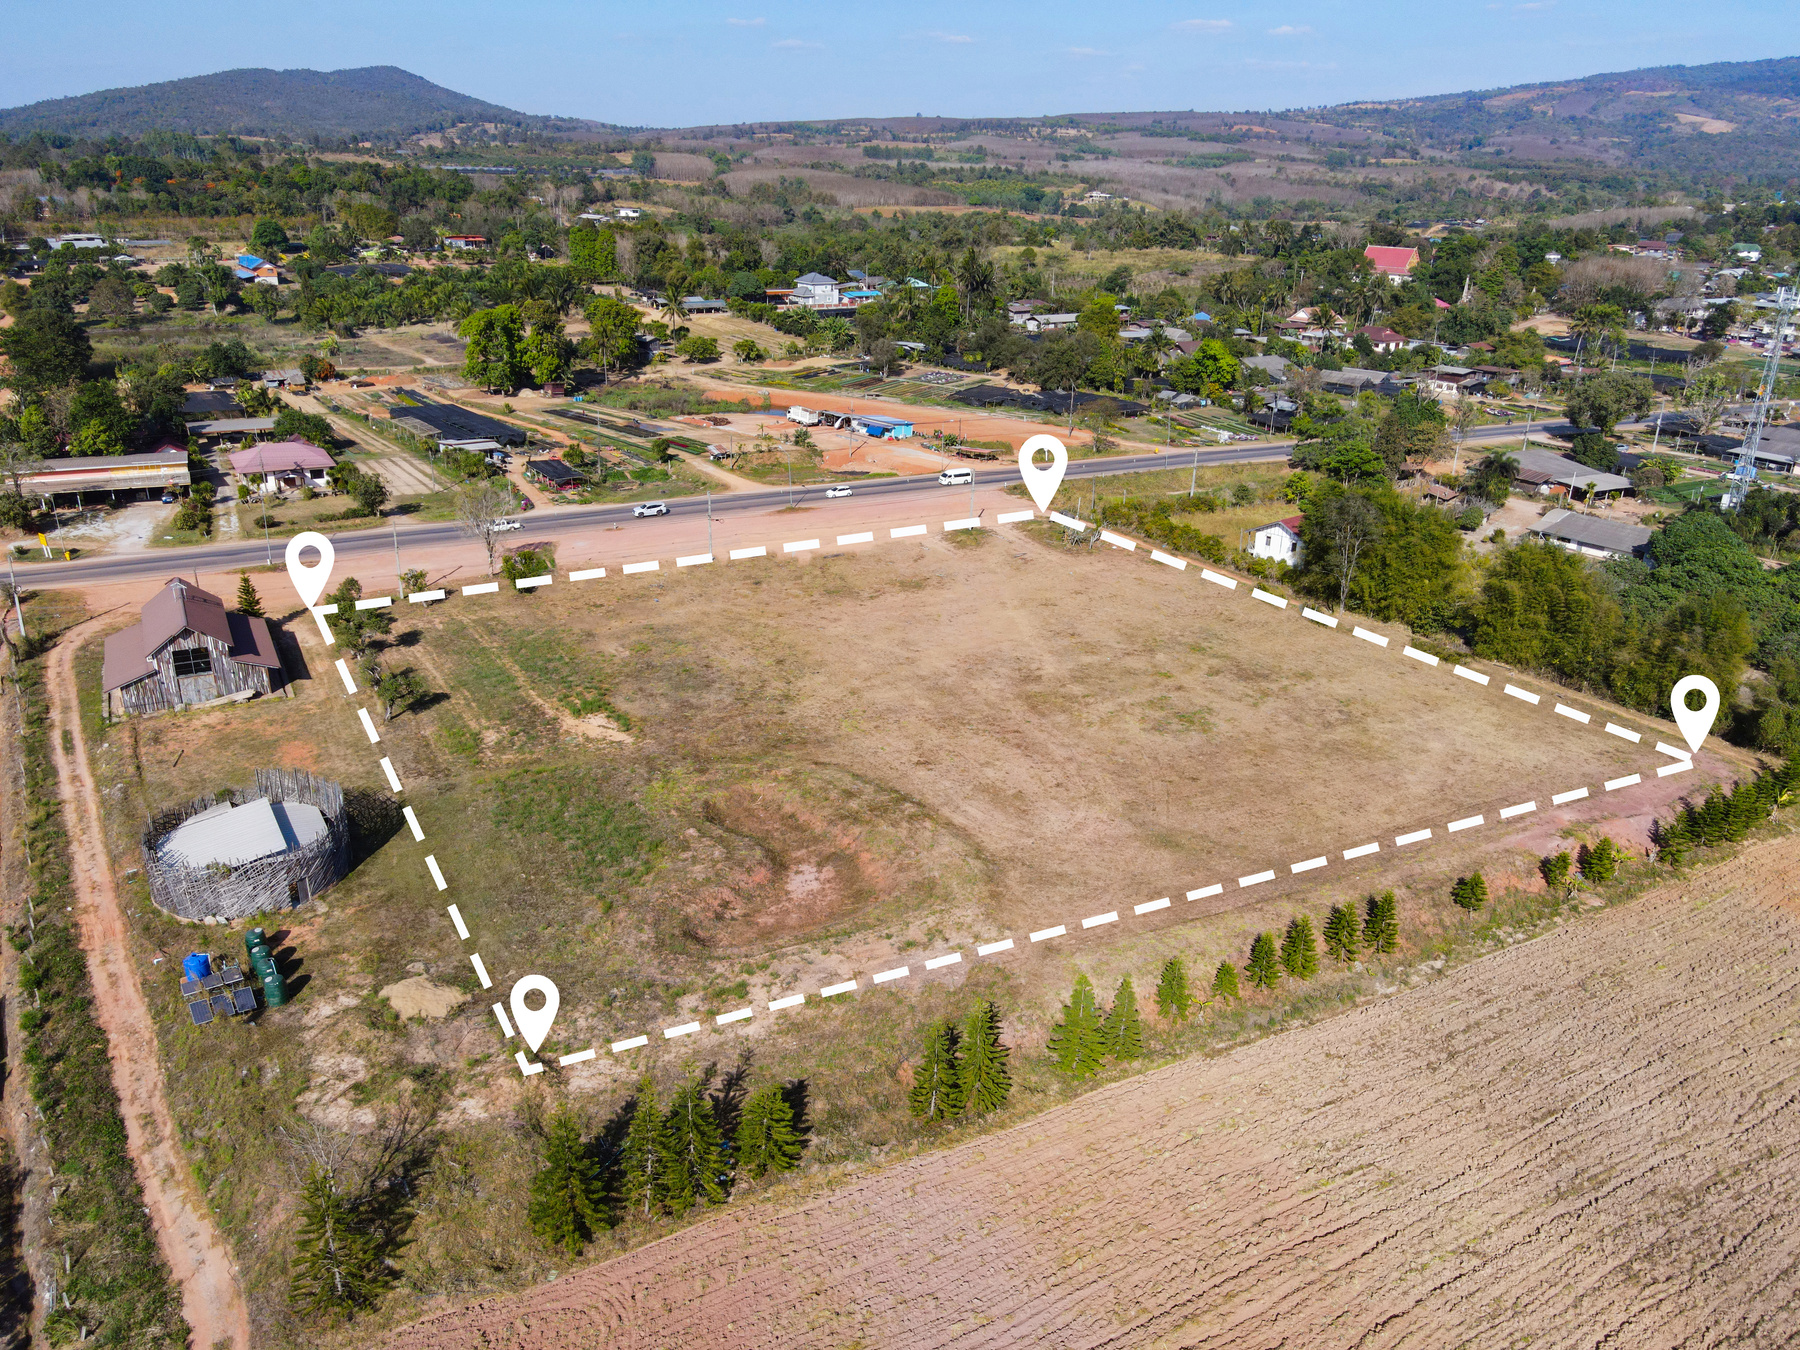 Land plot for building house aerial view, land field with pins,